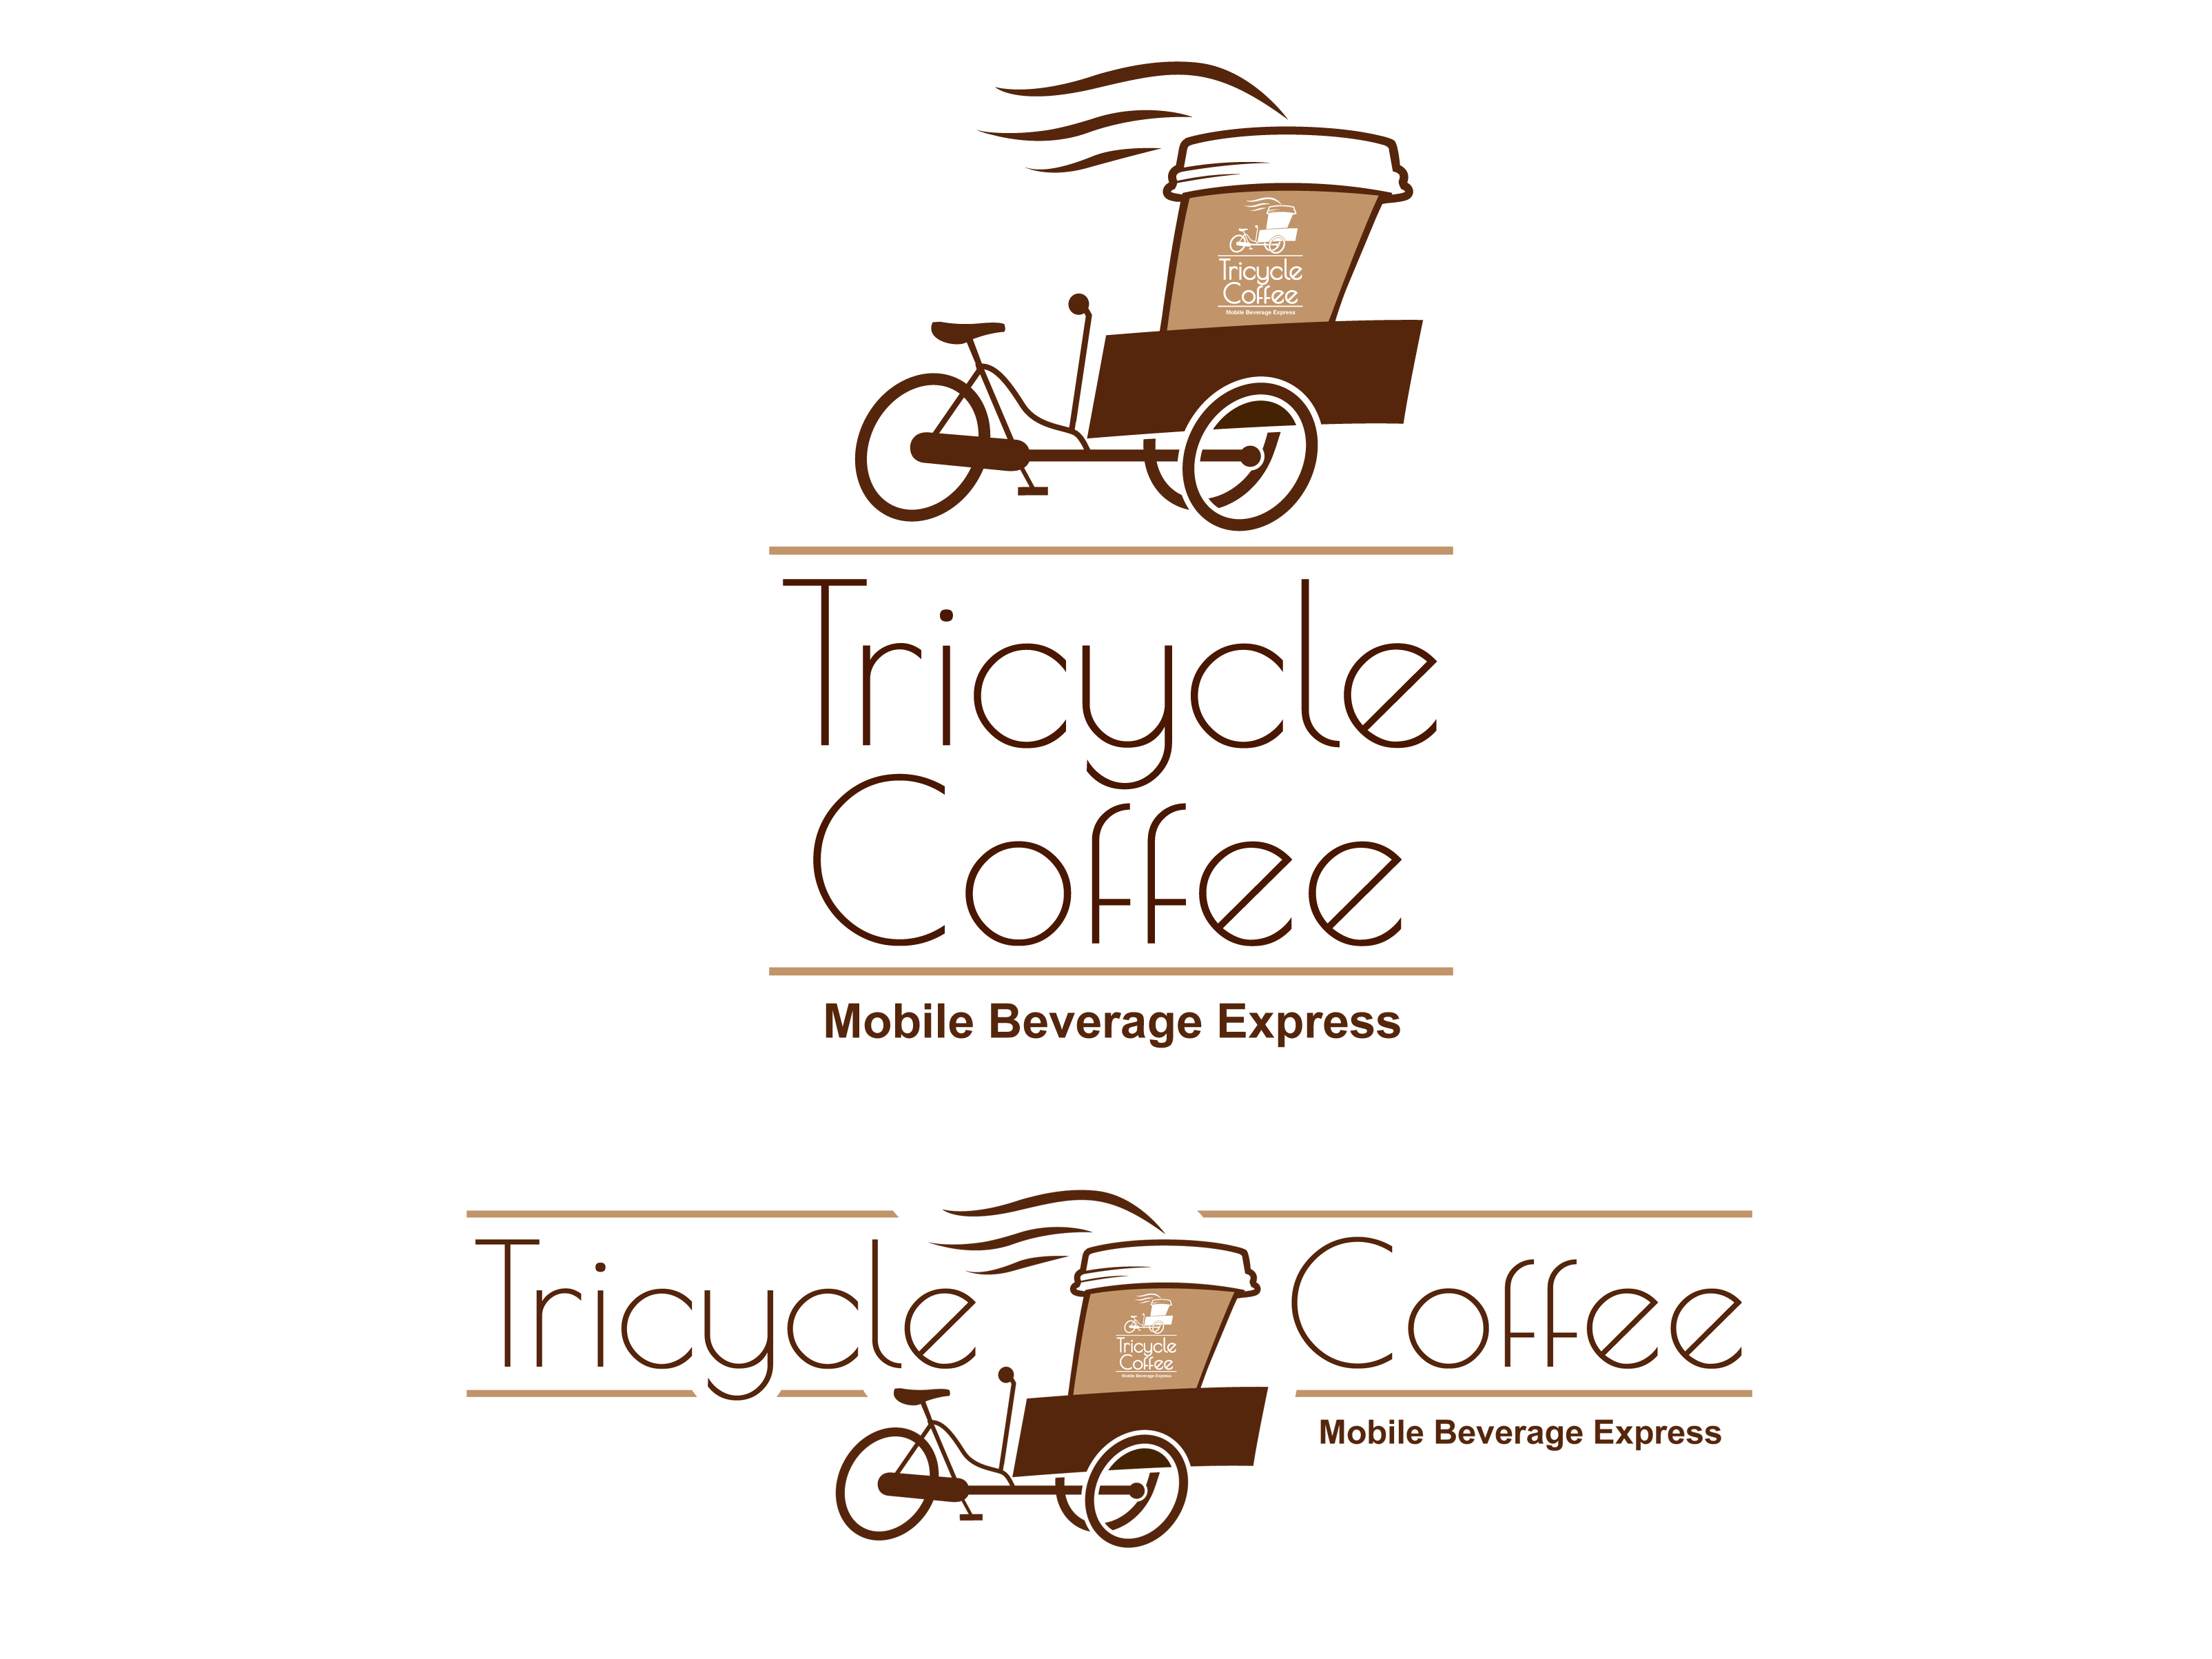 Tricycle Logo - Logo Design. 'Tricycle Coffee' design project. DesignContest ®